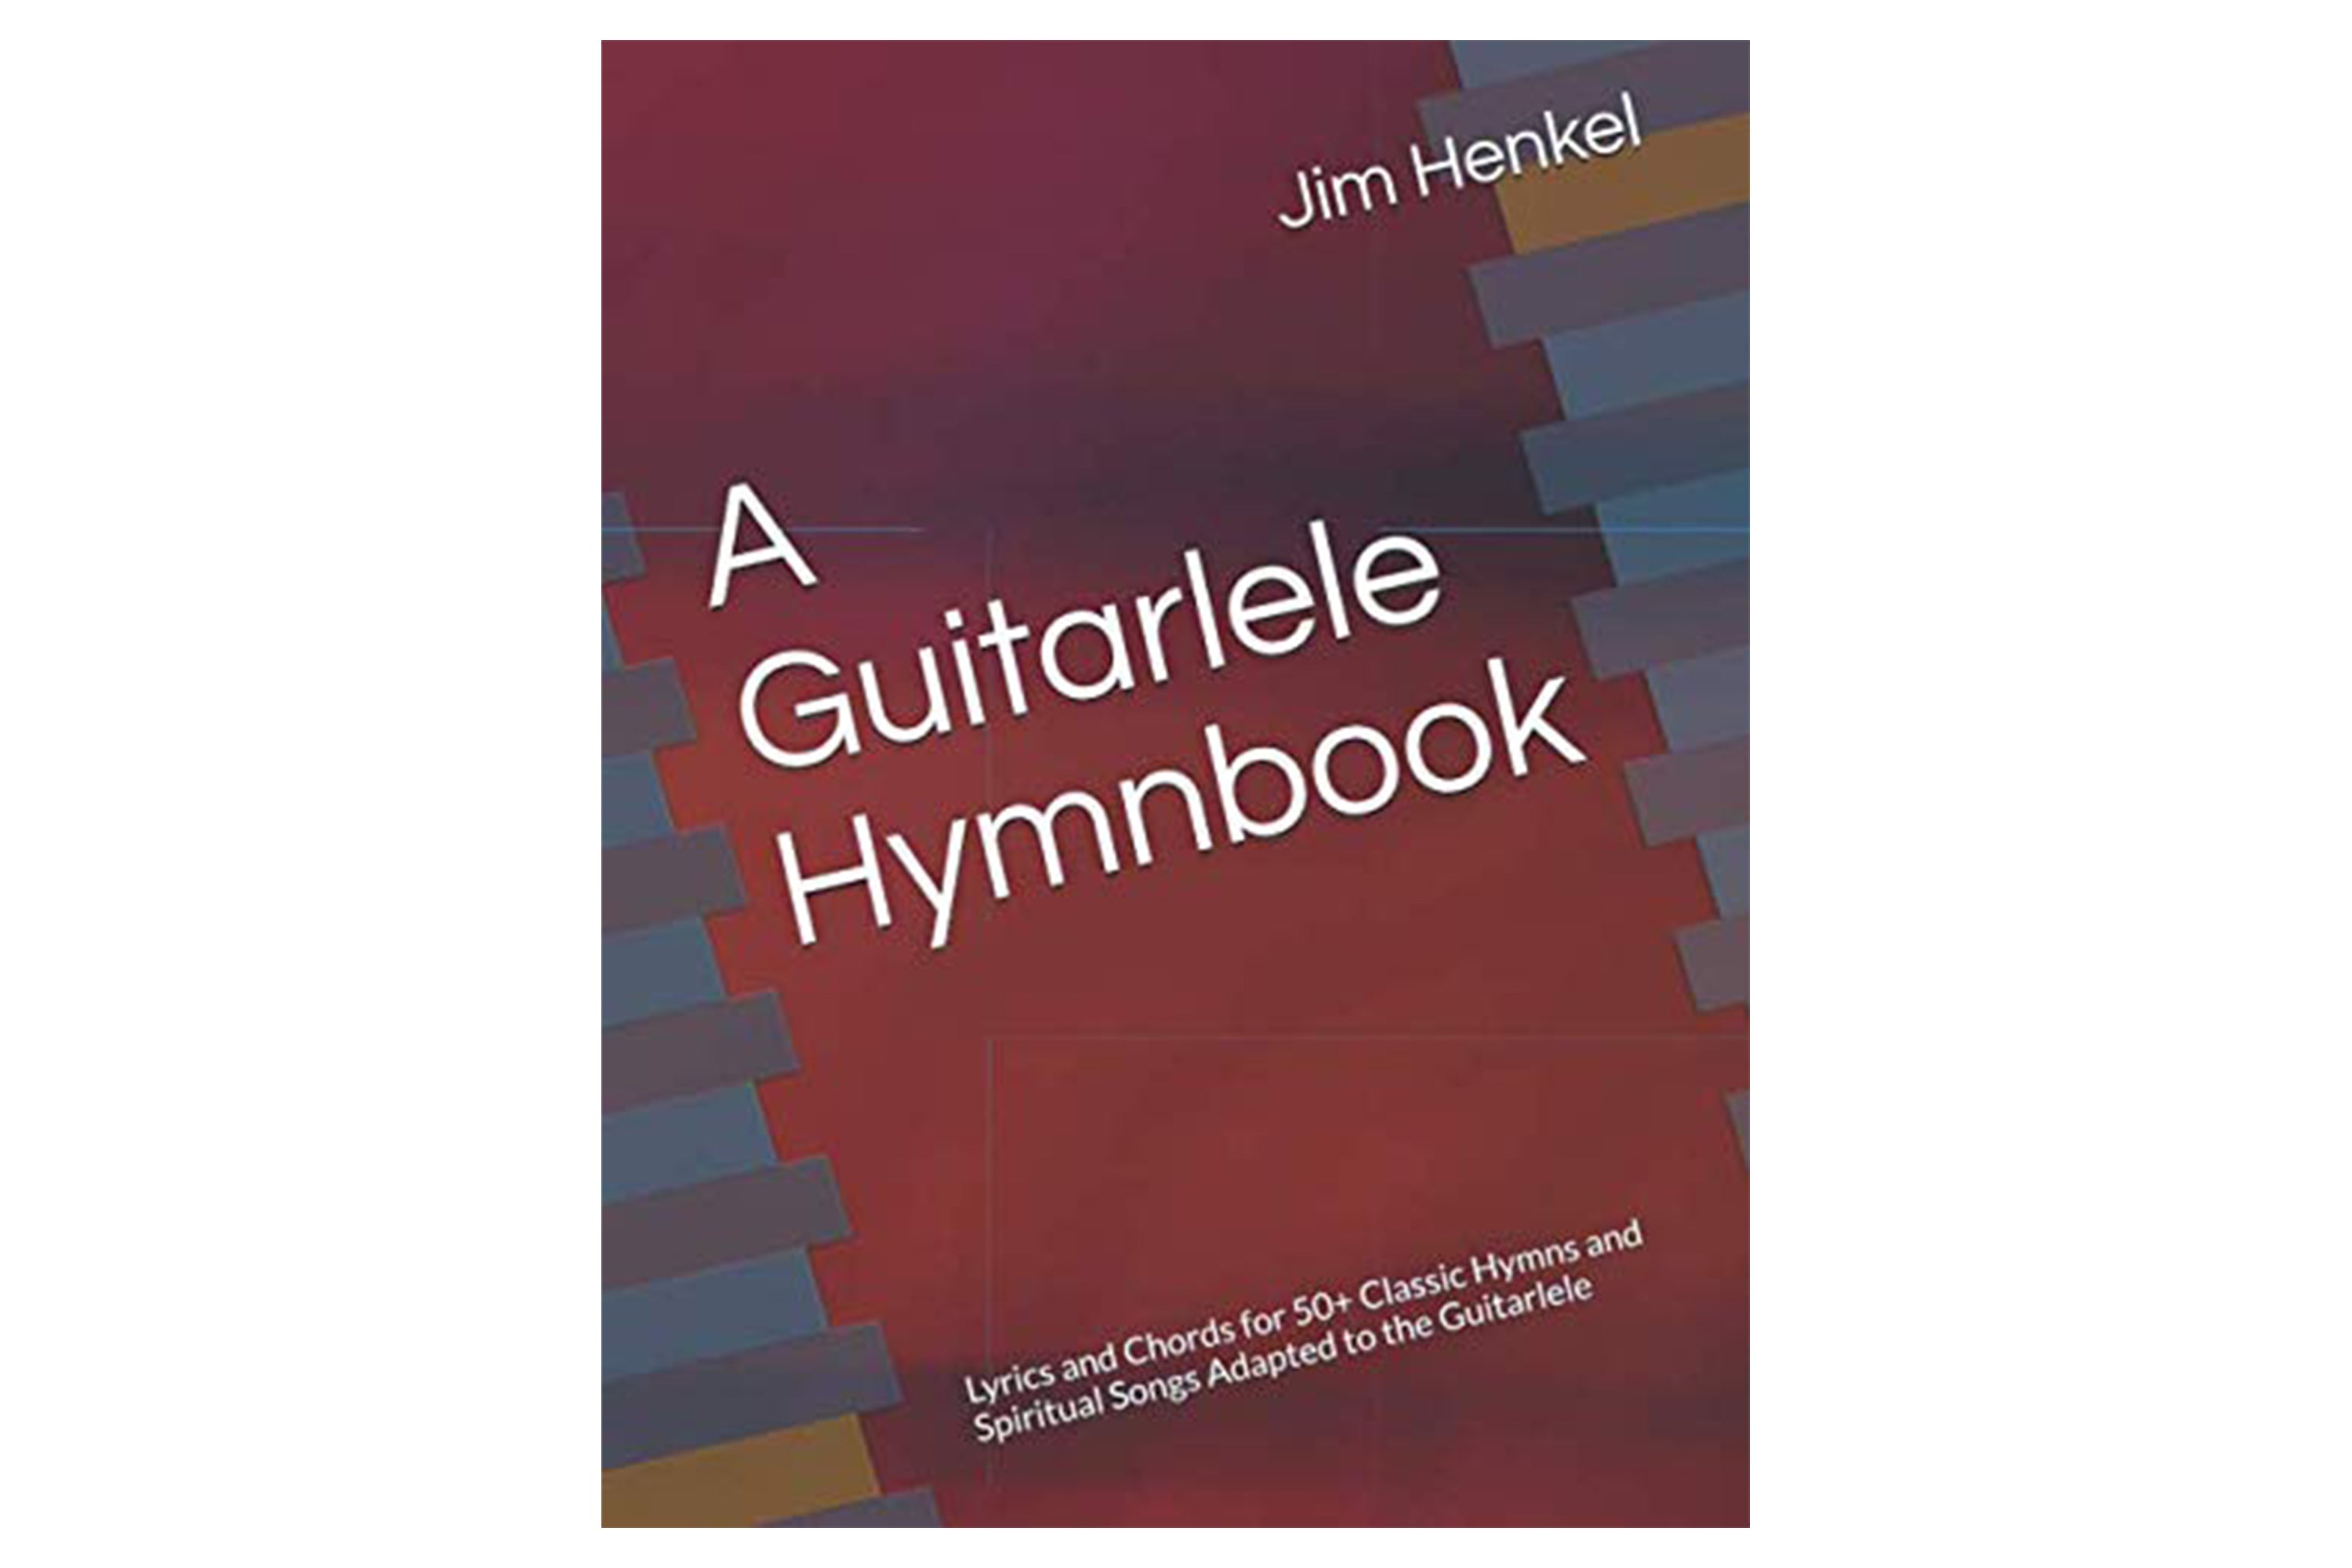 A Guitarlele Hymnbook: Lyrics and Chords for 50+ Classic Hymns and Spiritual Songs